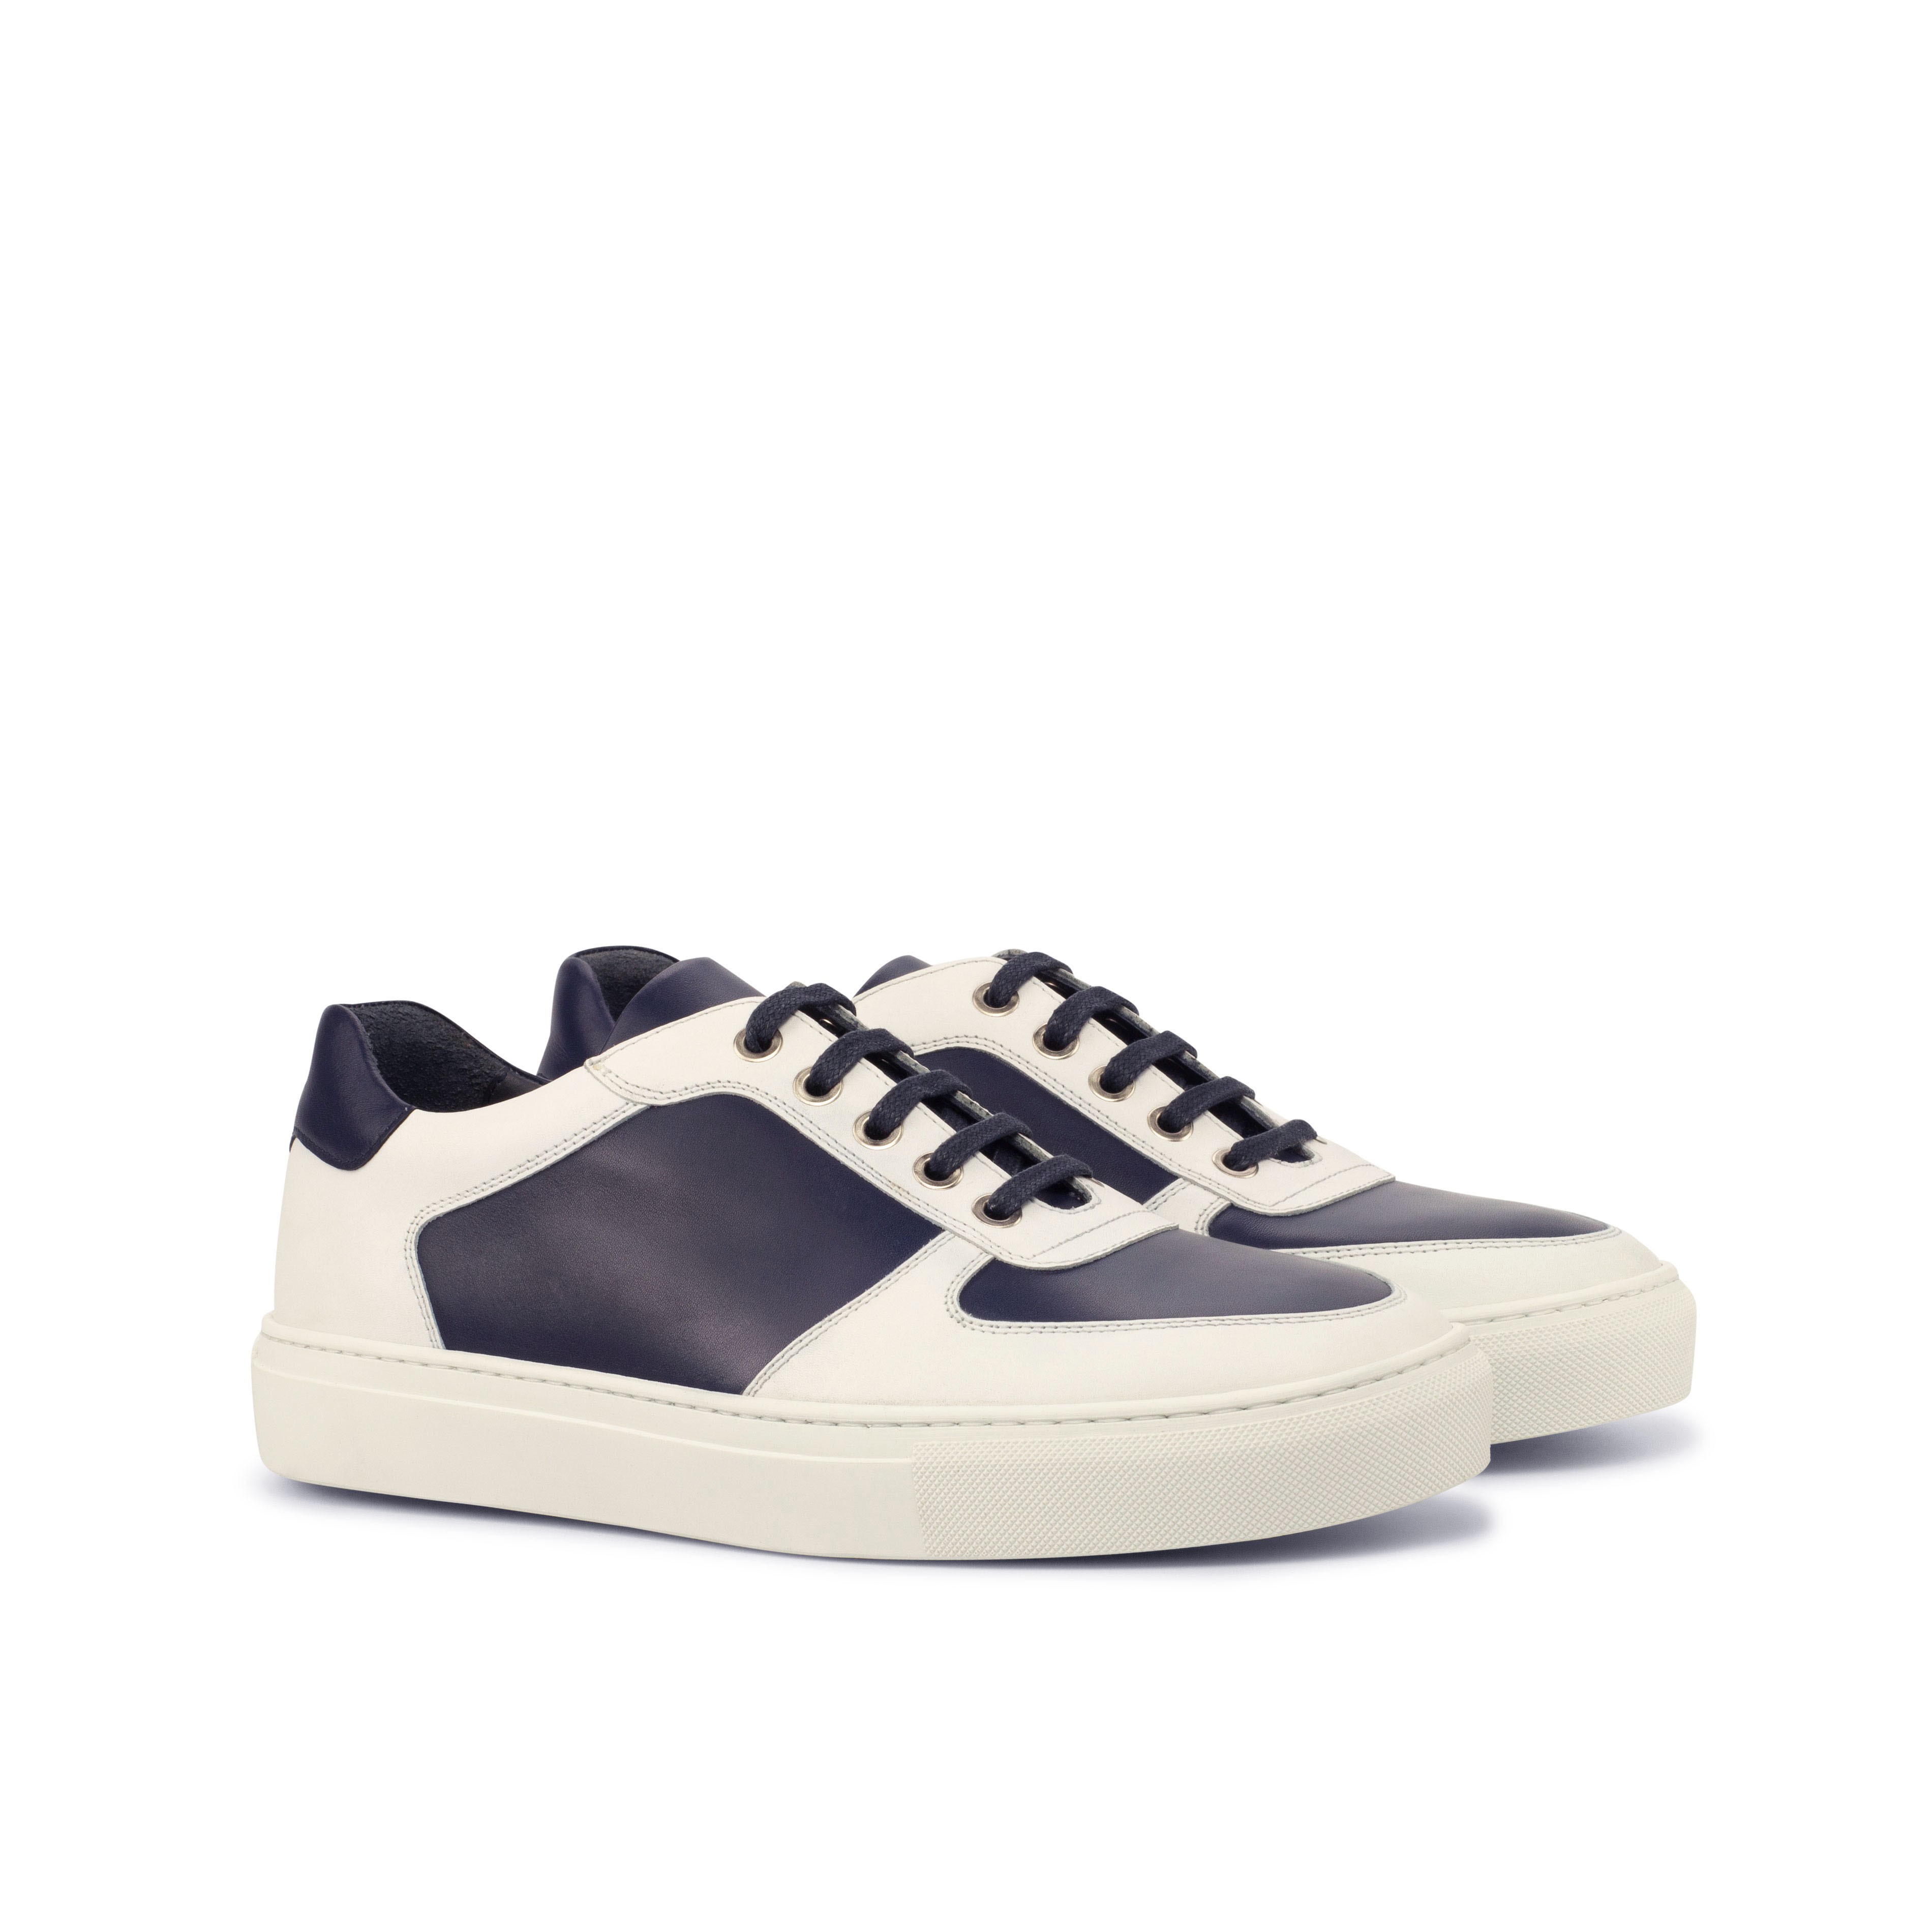 Navy & White Box Calf Low Top Trainer